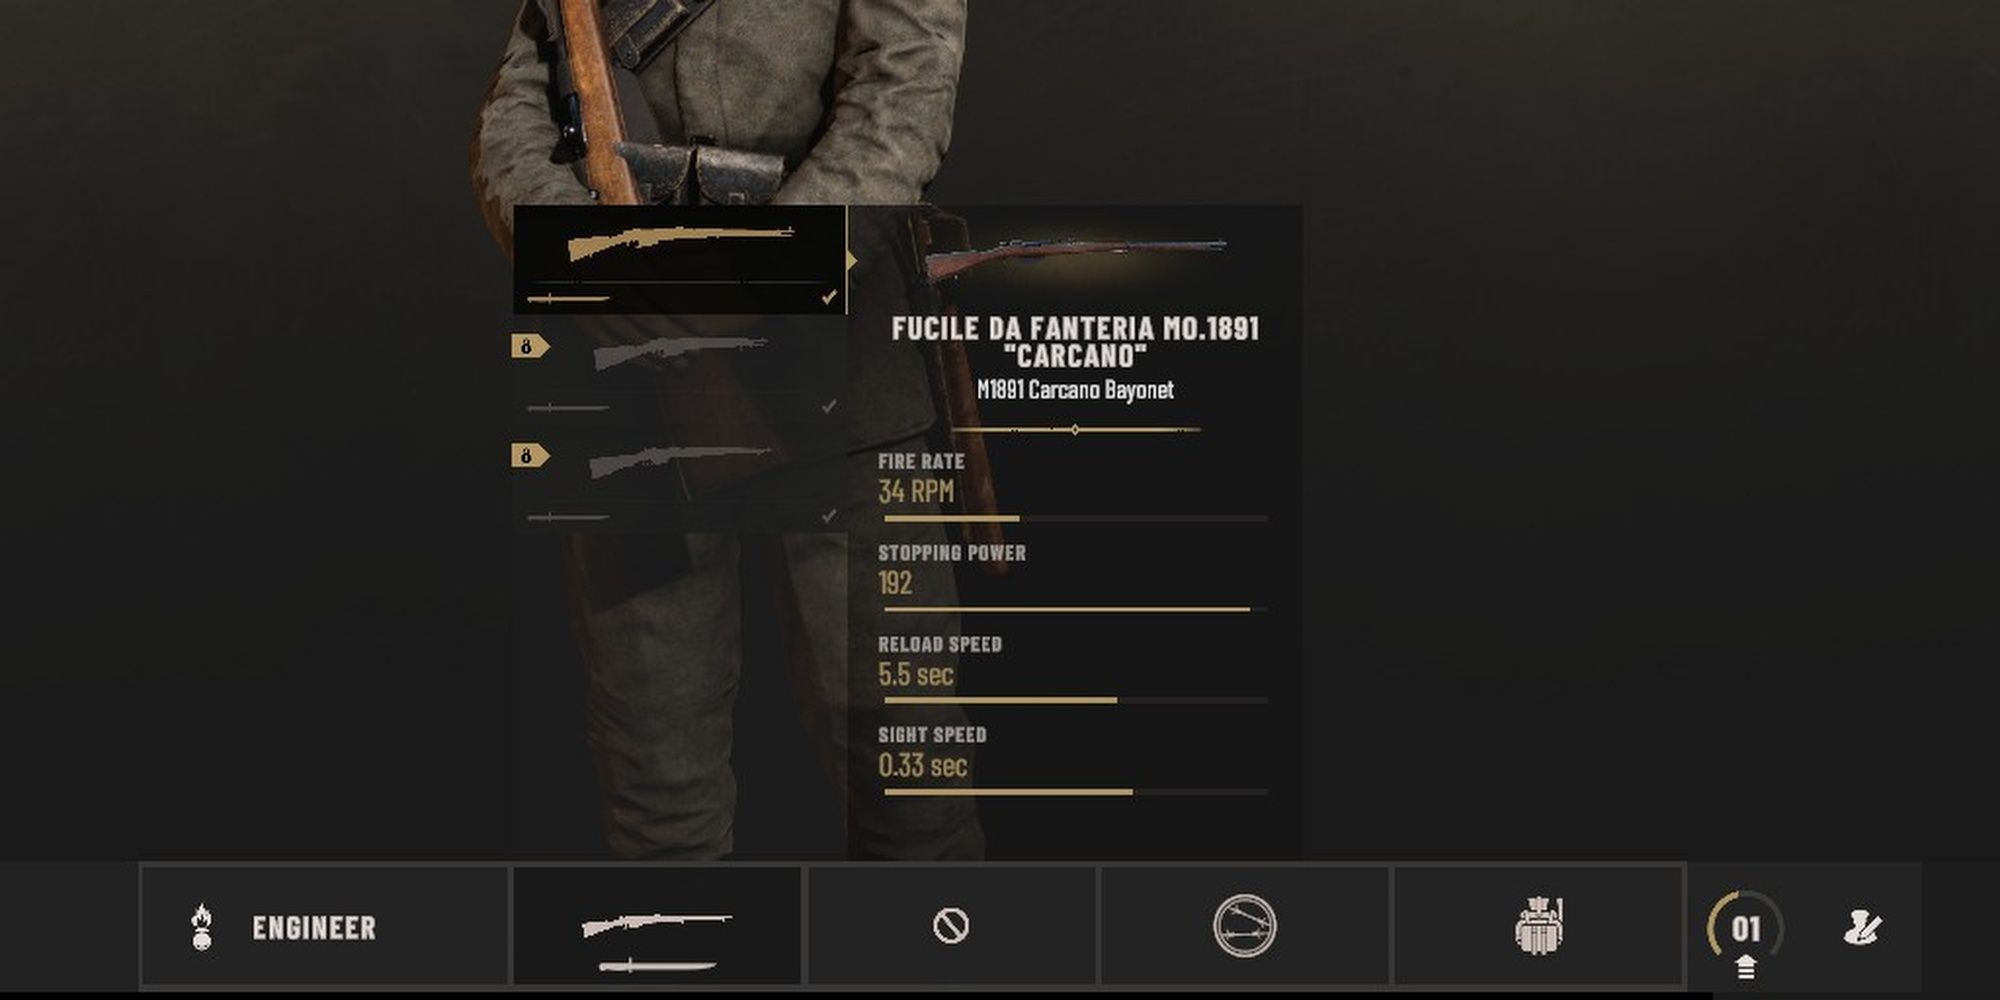 Isonzo: The Inventory Loadout Of The Engineer